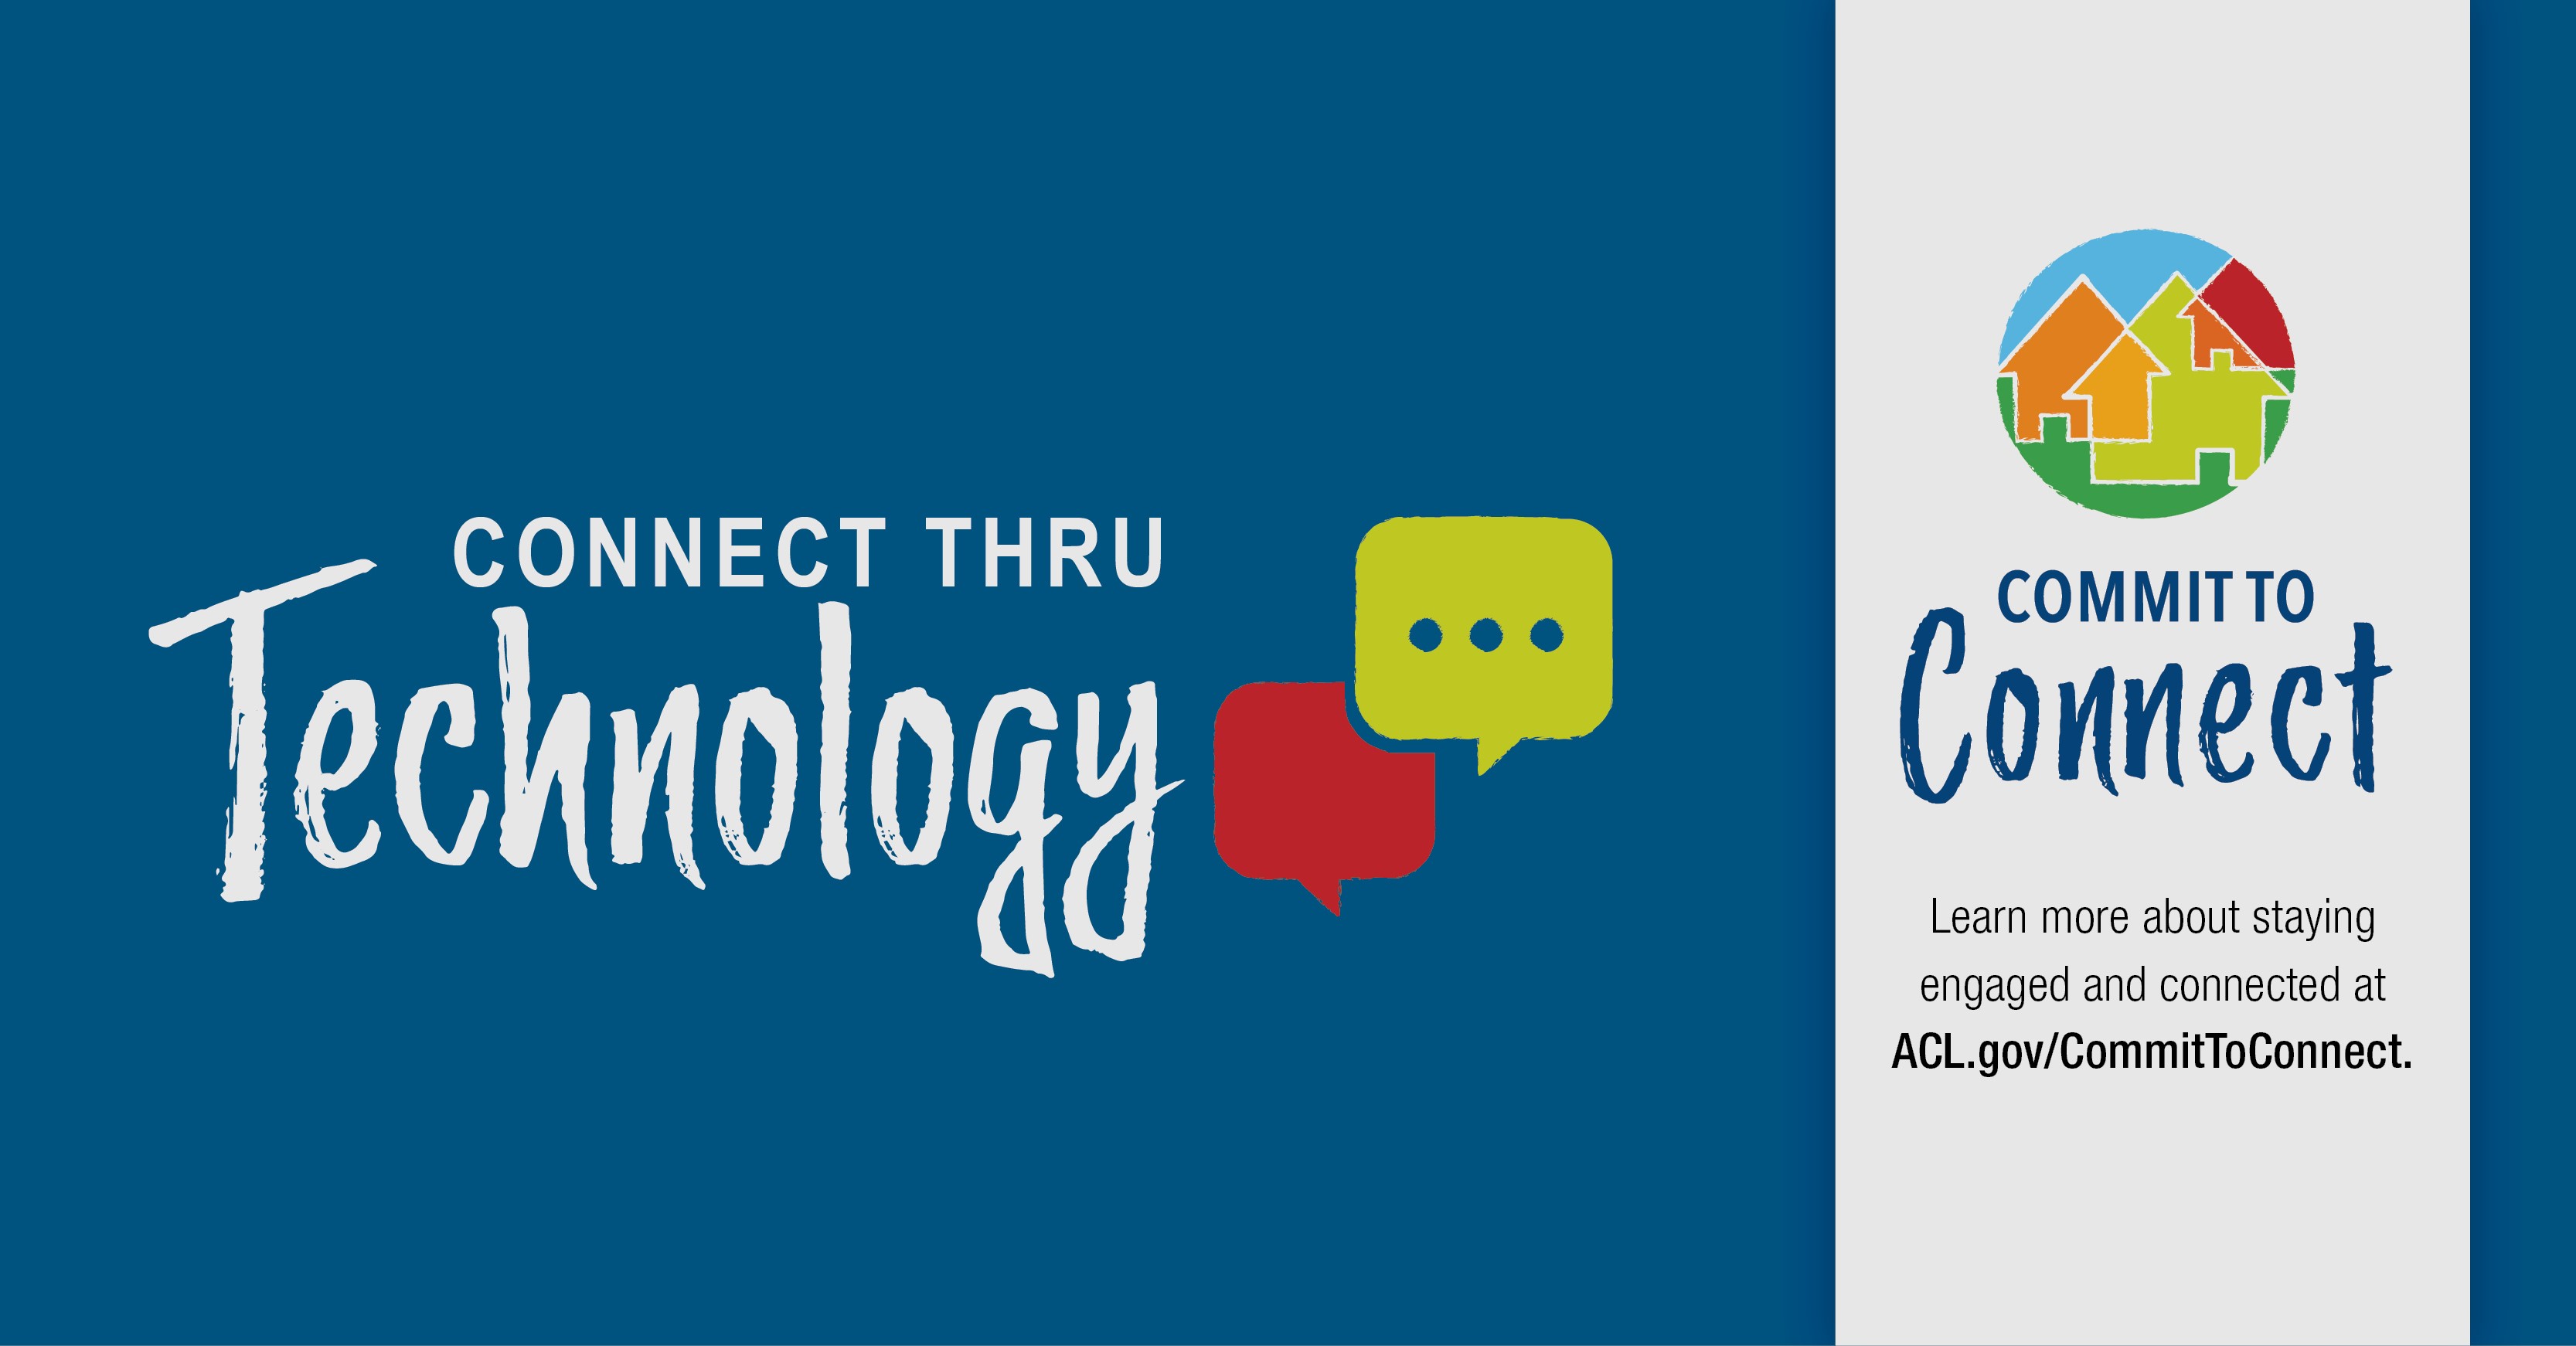 Commit to connect through technology. Learn more about staying connected over the holidays at acl.gov/engage.